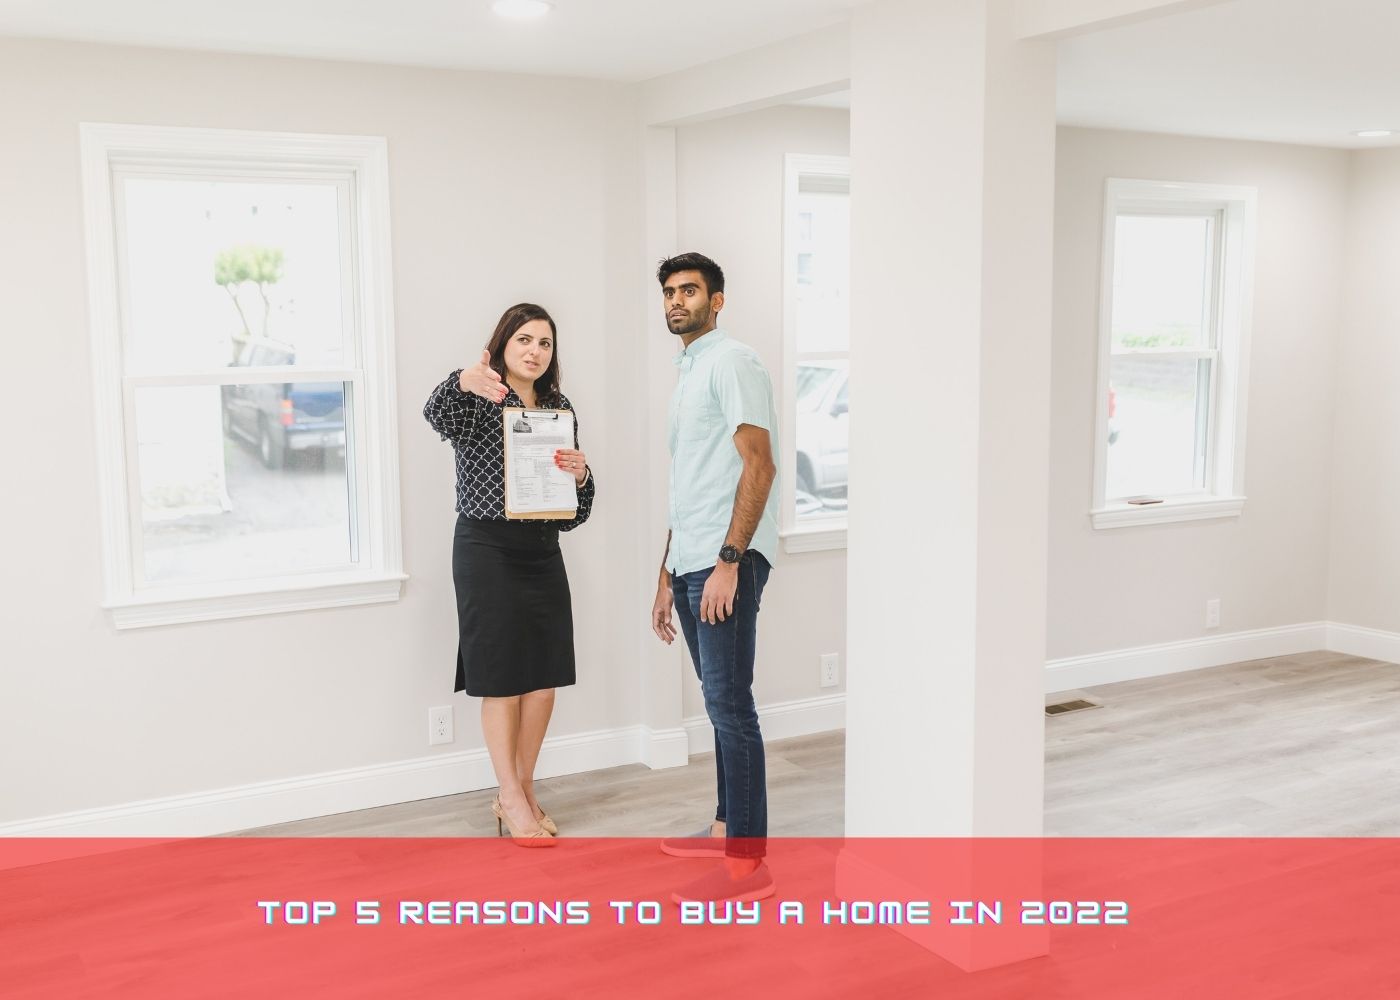 Top 5 Reasons to Buy a Home in 2022 